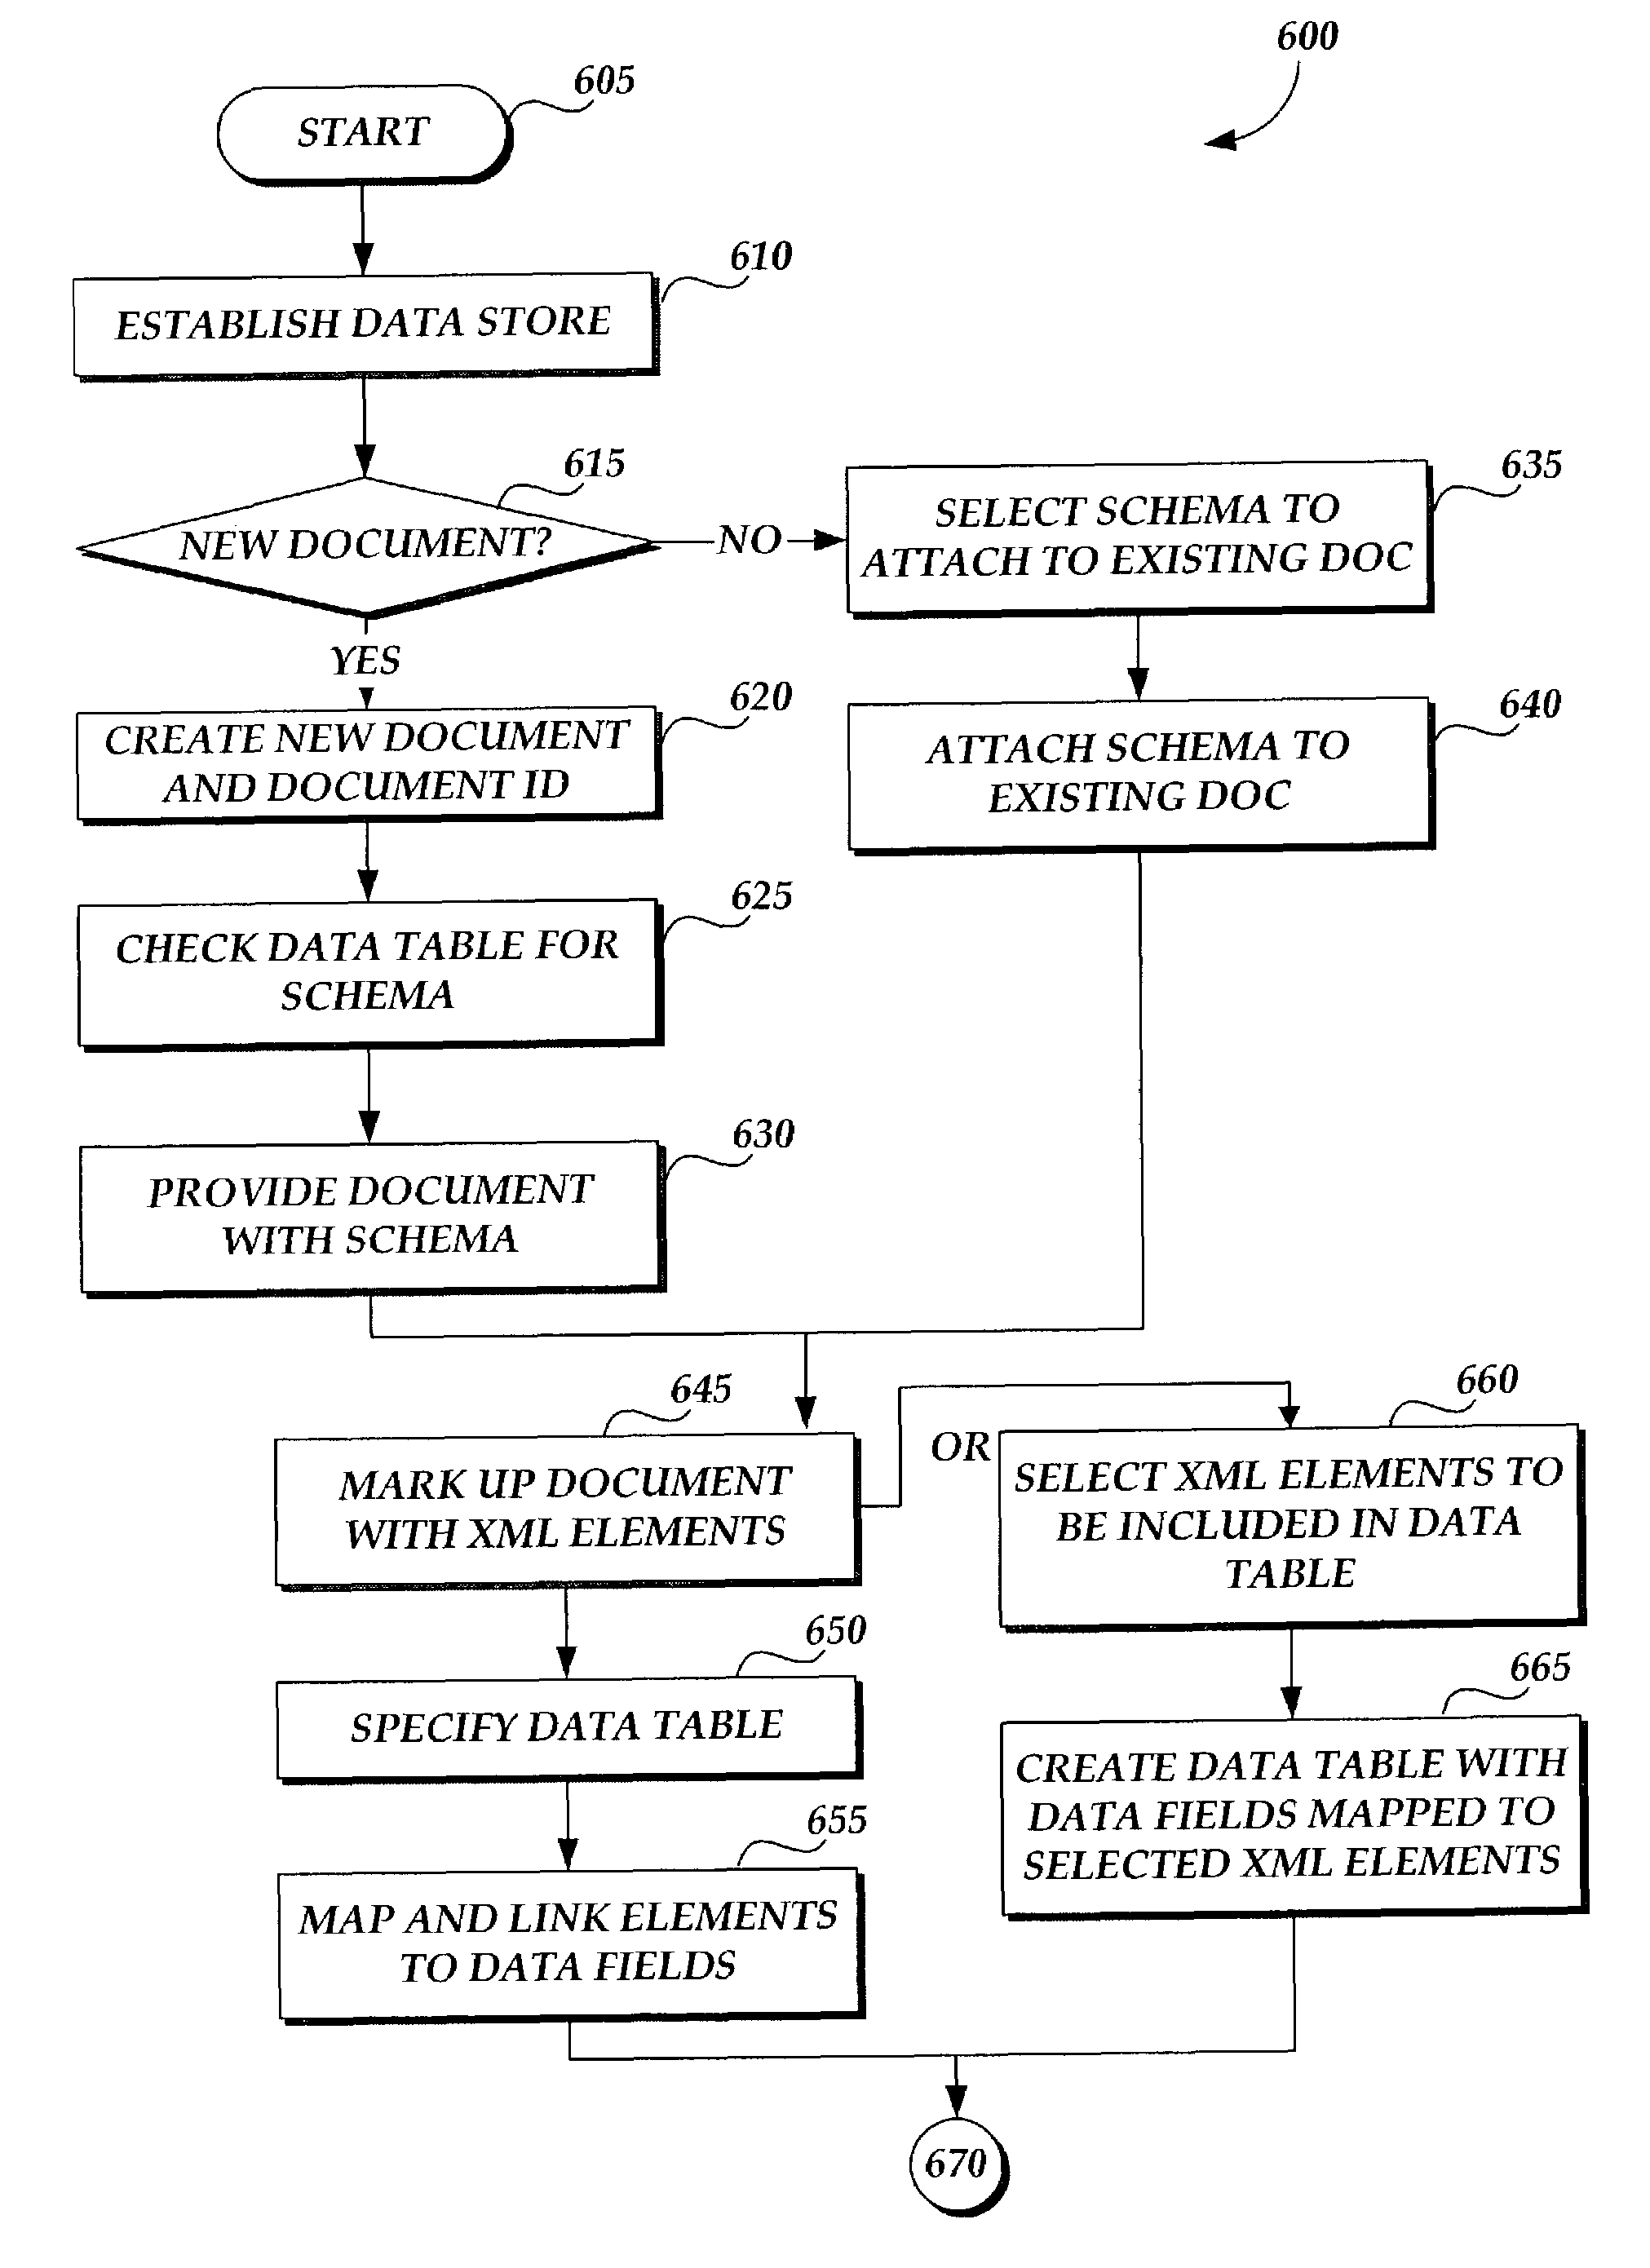 Linking elements of a document to corresponding fields, queries and/or procedures in a database